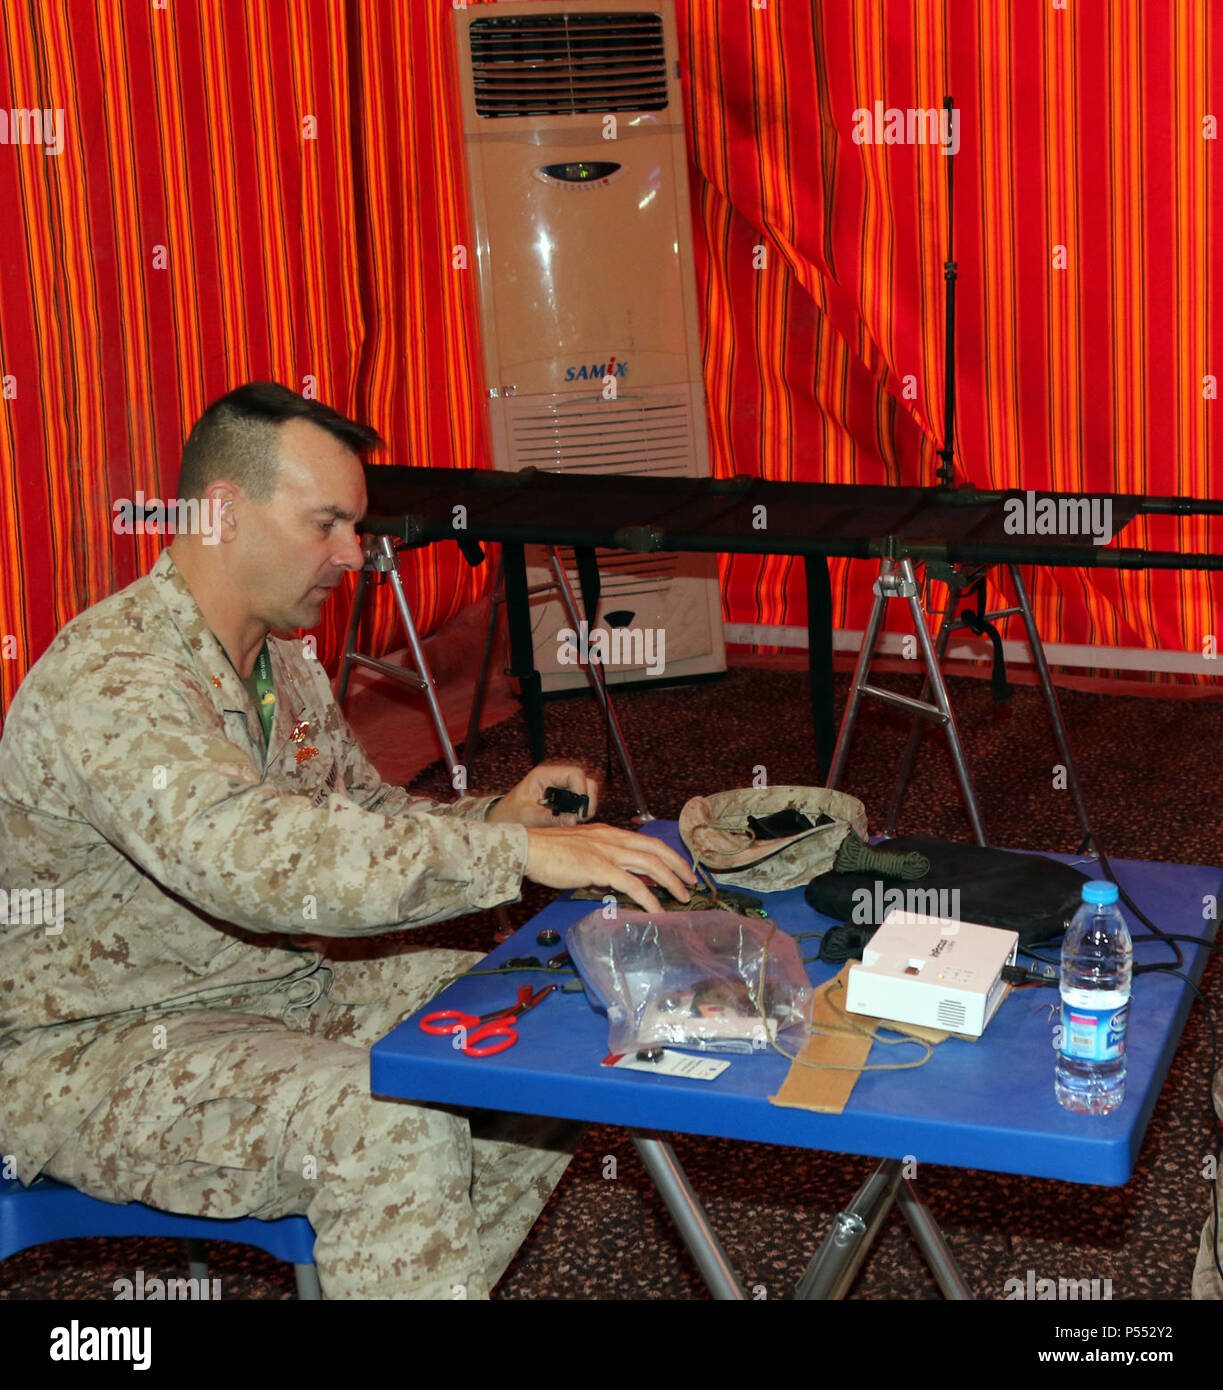 Lt. Cmdr. James Hartwell, an emergency physician with the Naval Hospital at Camp Pendleton, Calif., assembles supplies before the start of the workday May 9, during exercise Eager Lion at the Joint Training Center in Jordan. Eager Lion 2017 is an annual U.S. Central Command exercise in Jordan designed to strengthen military-to-military relationships between the U.S., Jordan and other international partners. This year’s iteration is comprised of about 7,200 military personnel from more than 20 nations that will respond to scenarios involving border security, command and control, cyber defense a Stock Photo